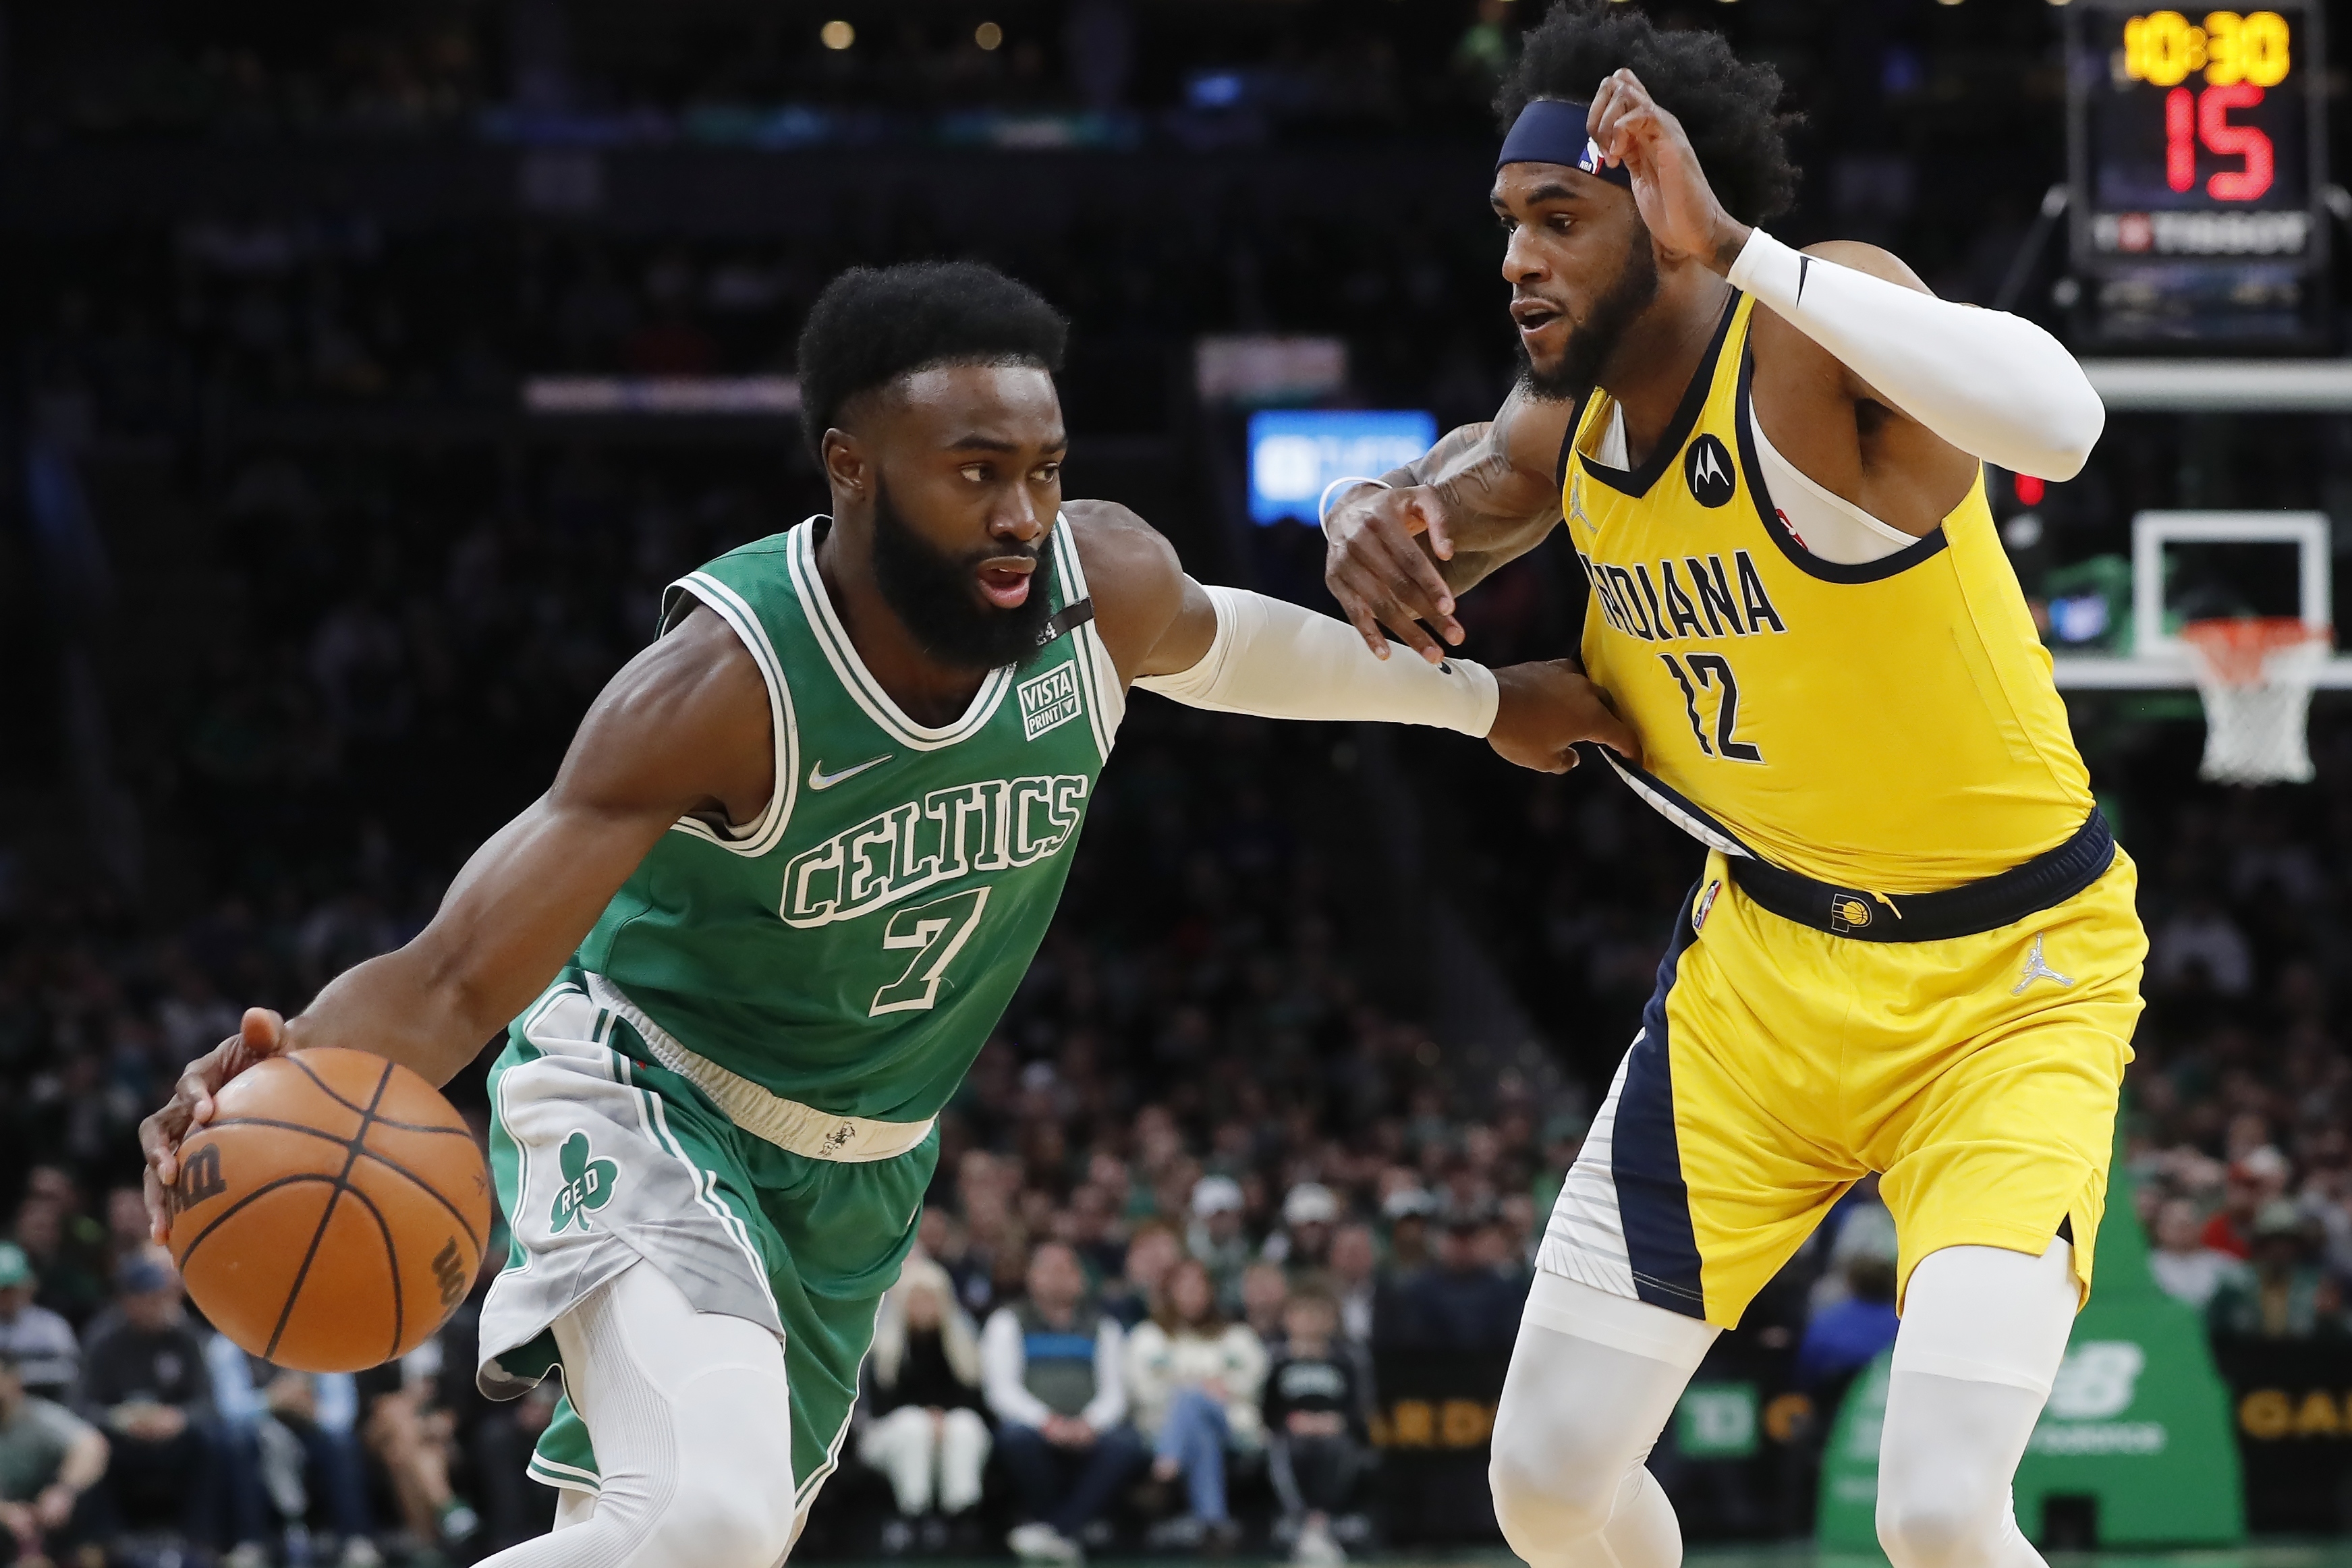 Pacers 95, Celtics 79: Indiana too much for Boston